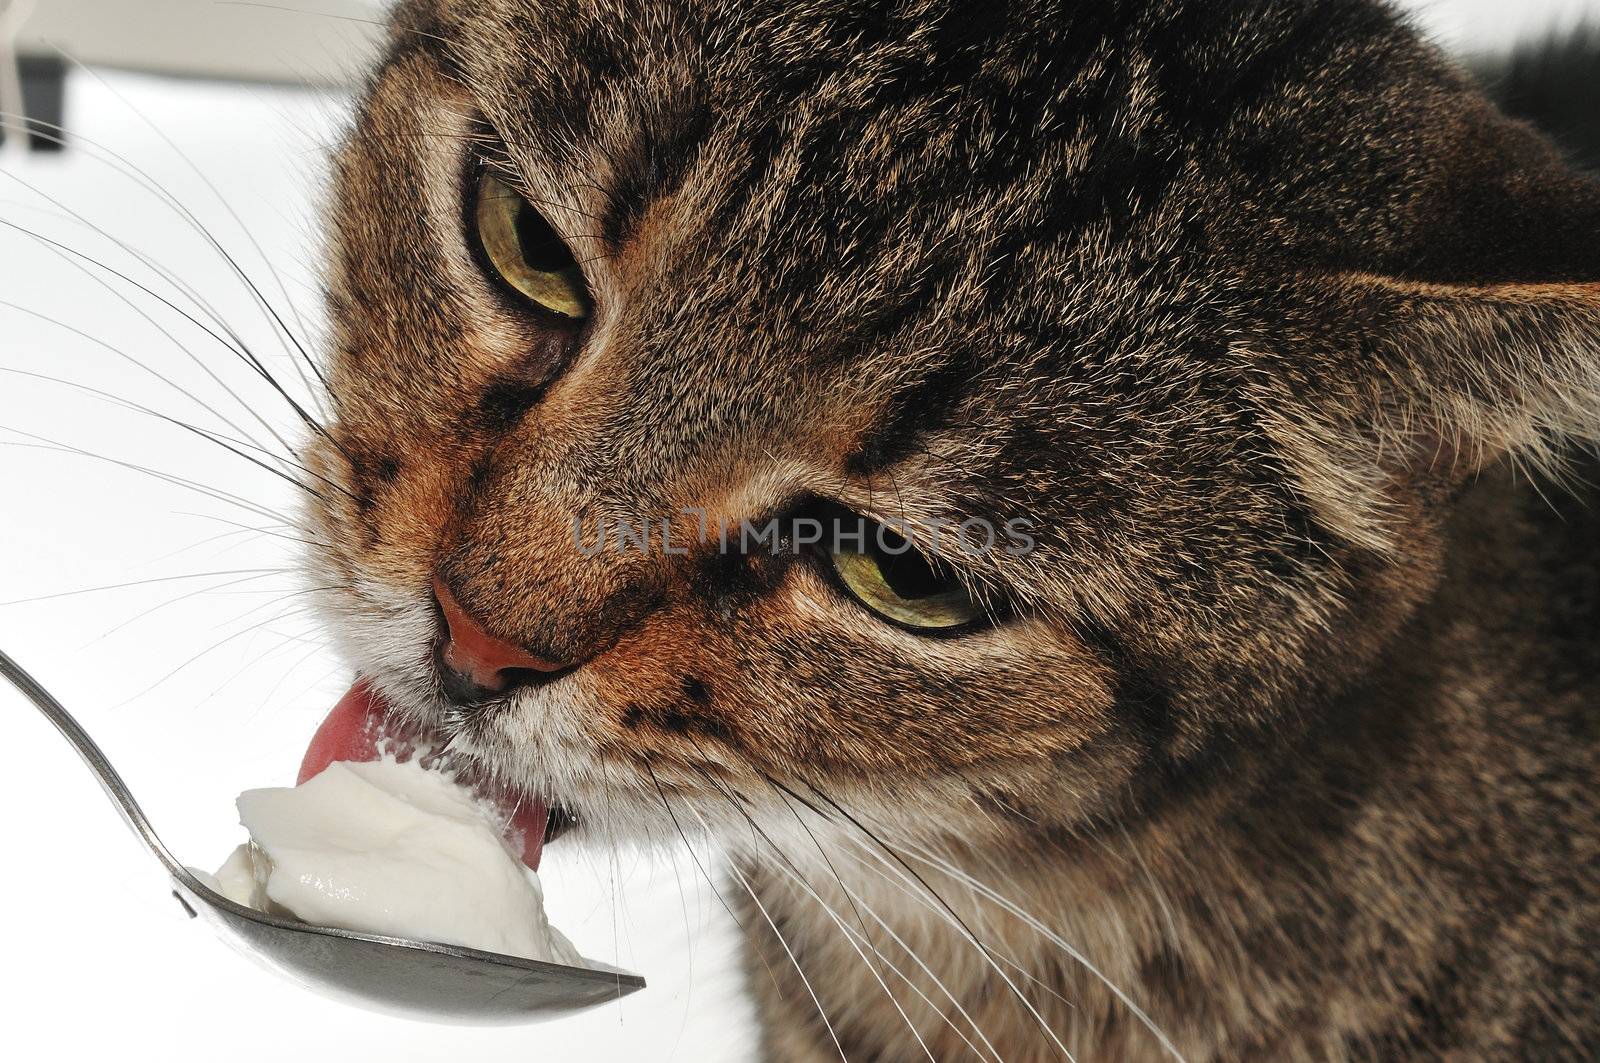 
cat eats sour cream from a spoon, which holds the master